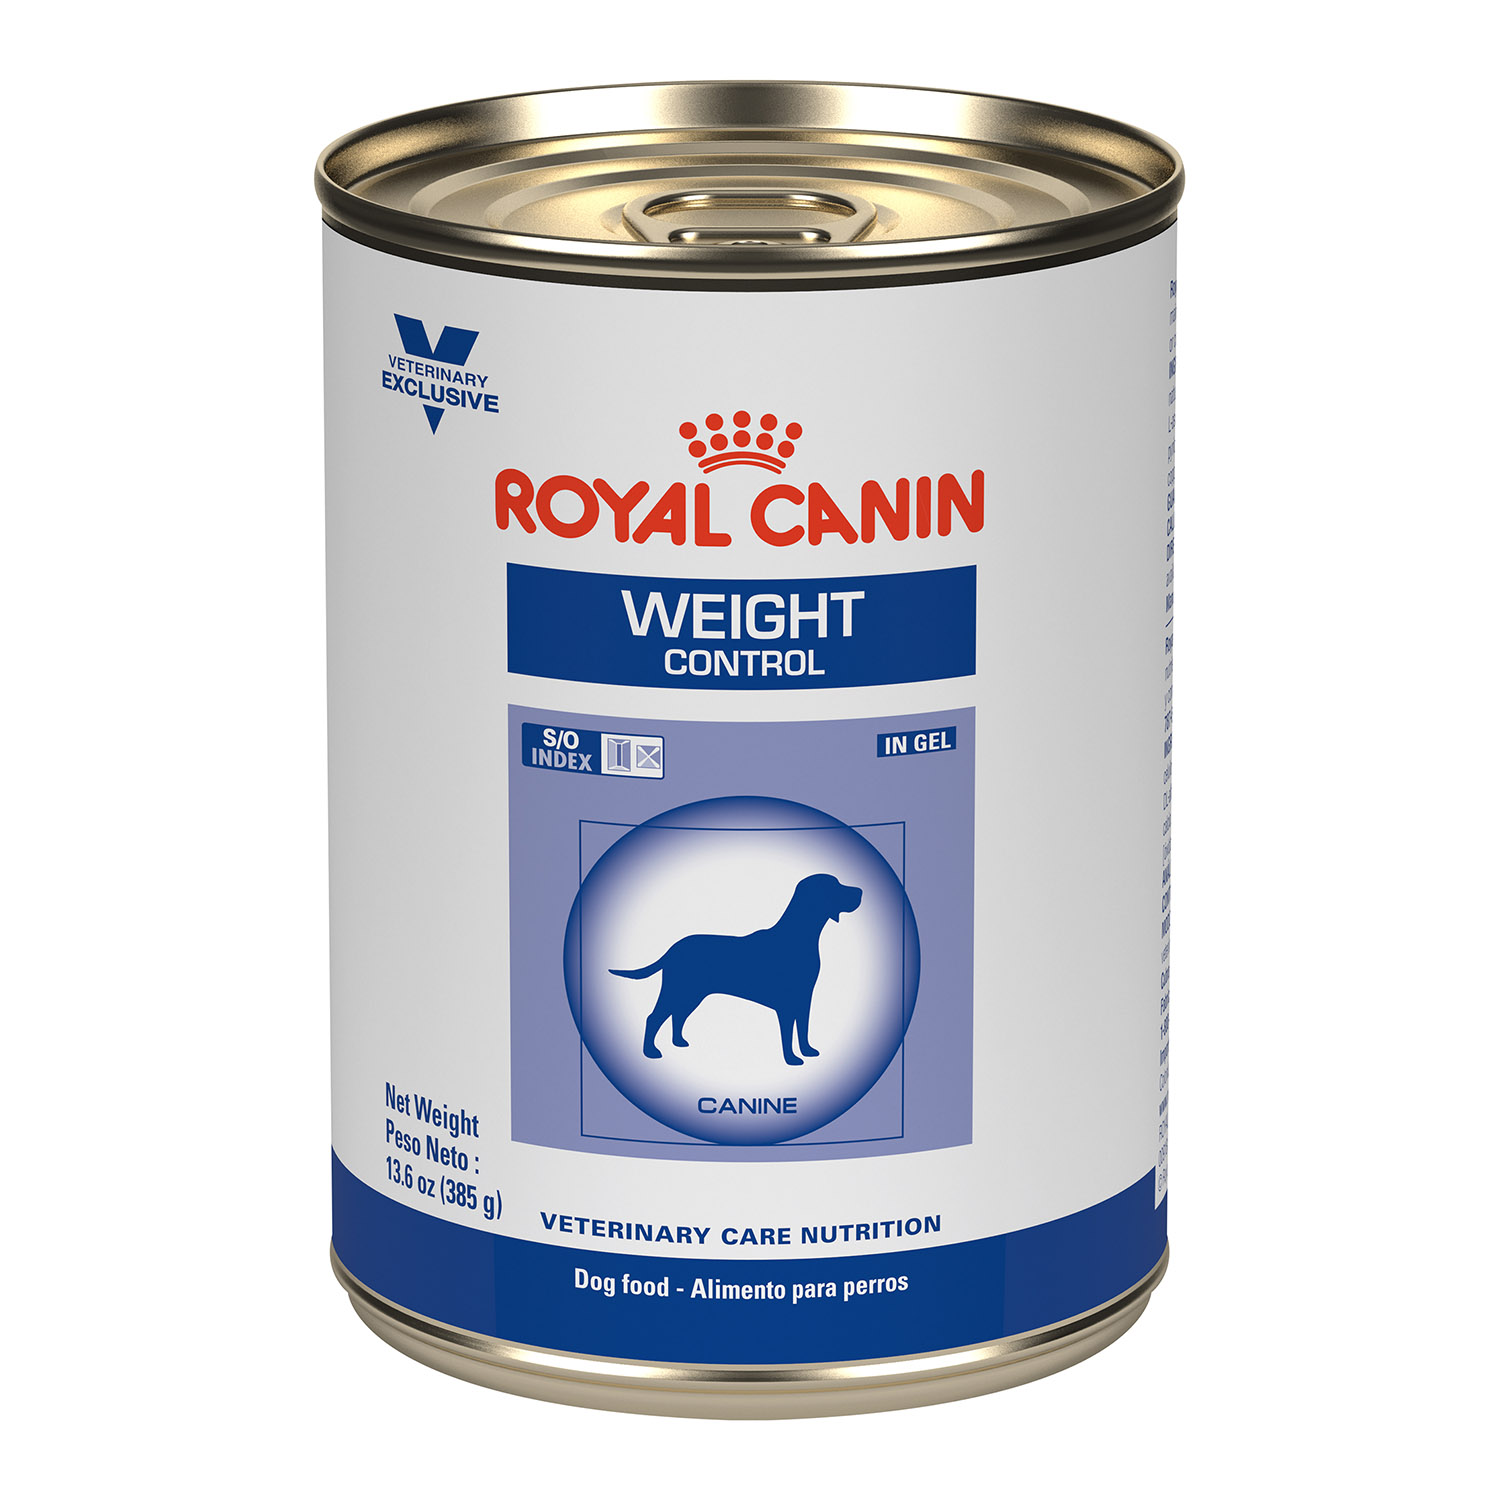 Royal Canin Veterinary Hydrolyzed Protein Loaf Canned Dog Food Review